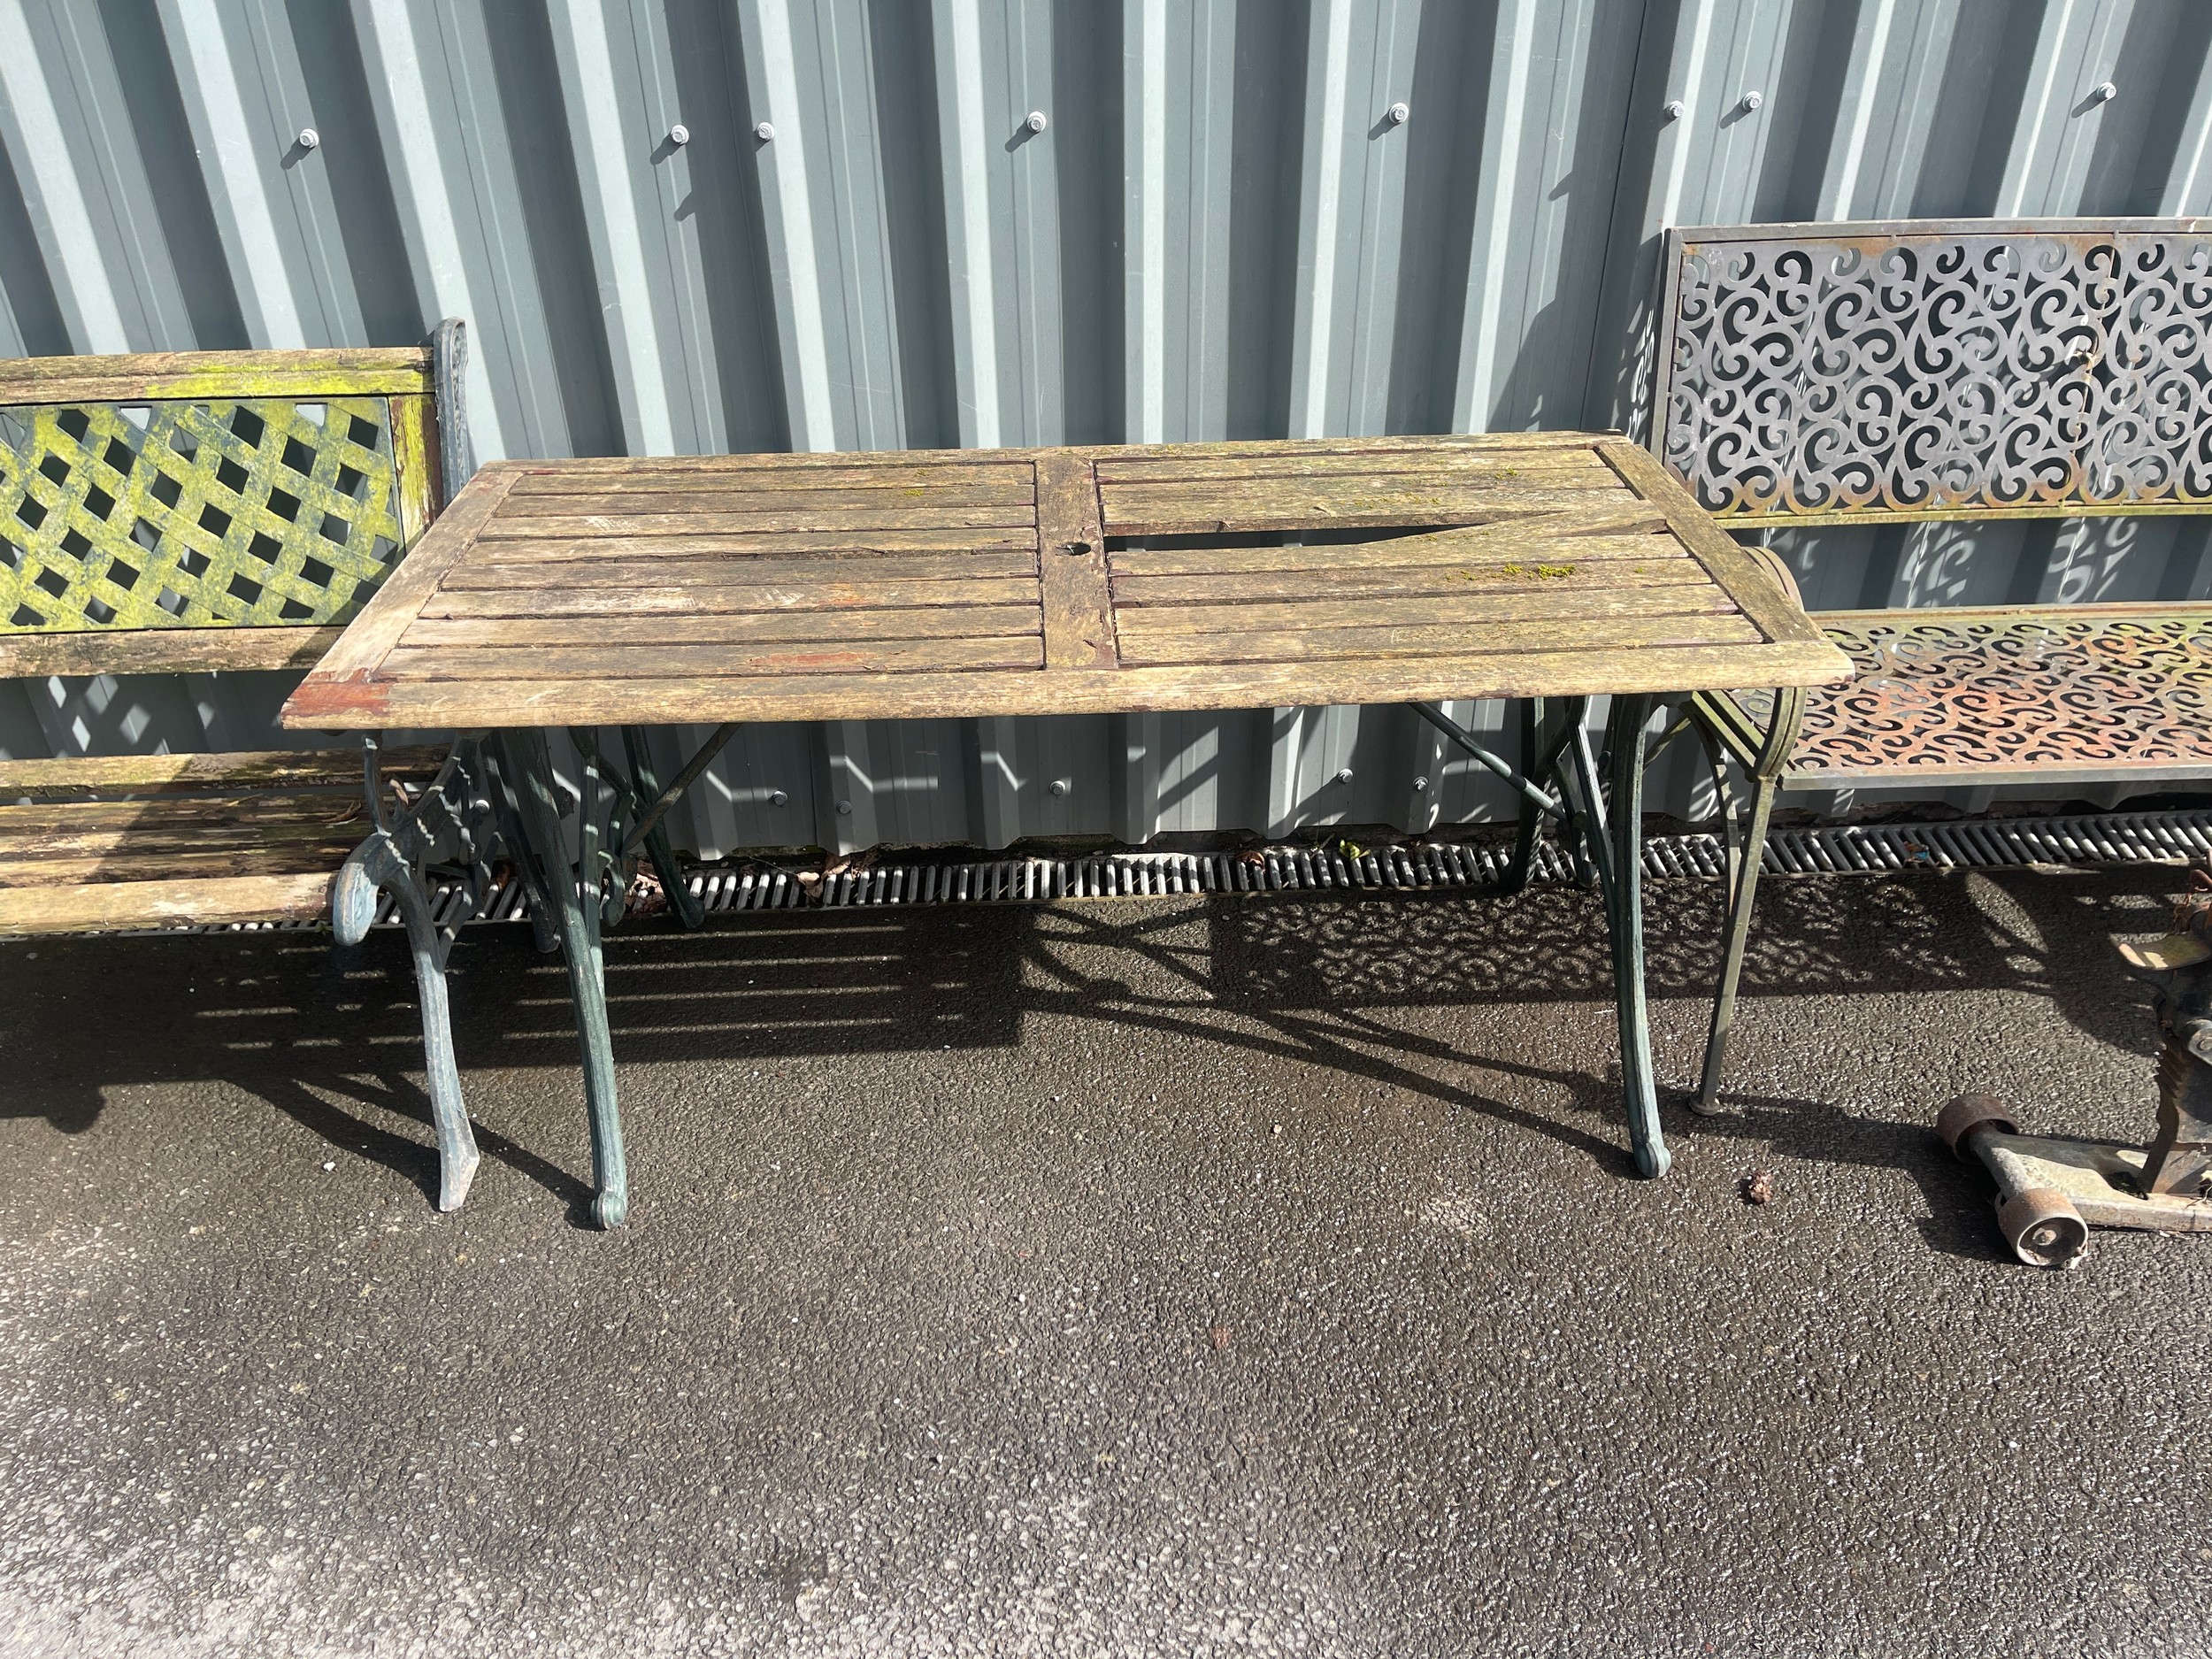 Vintage cast iron base garden table measures approximately